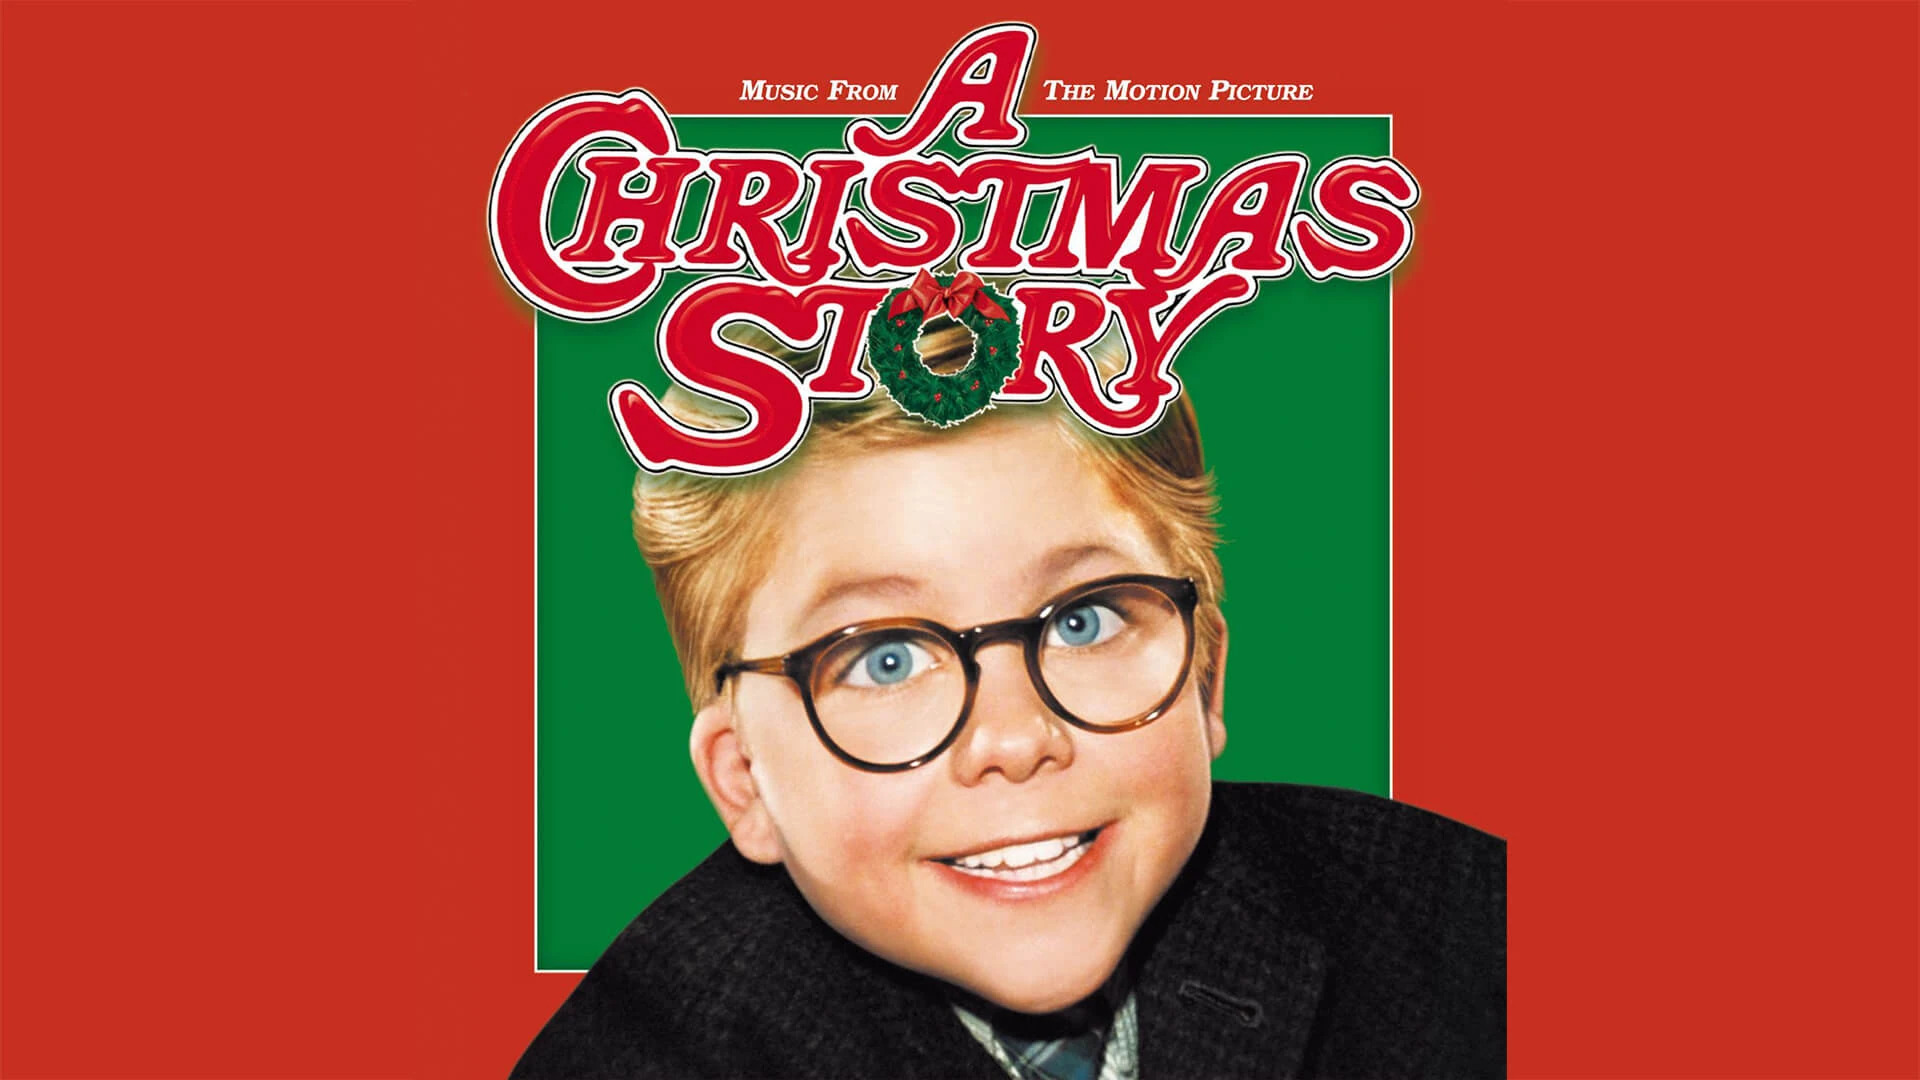 34-facts-about-the-movie-a-christmas-story